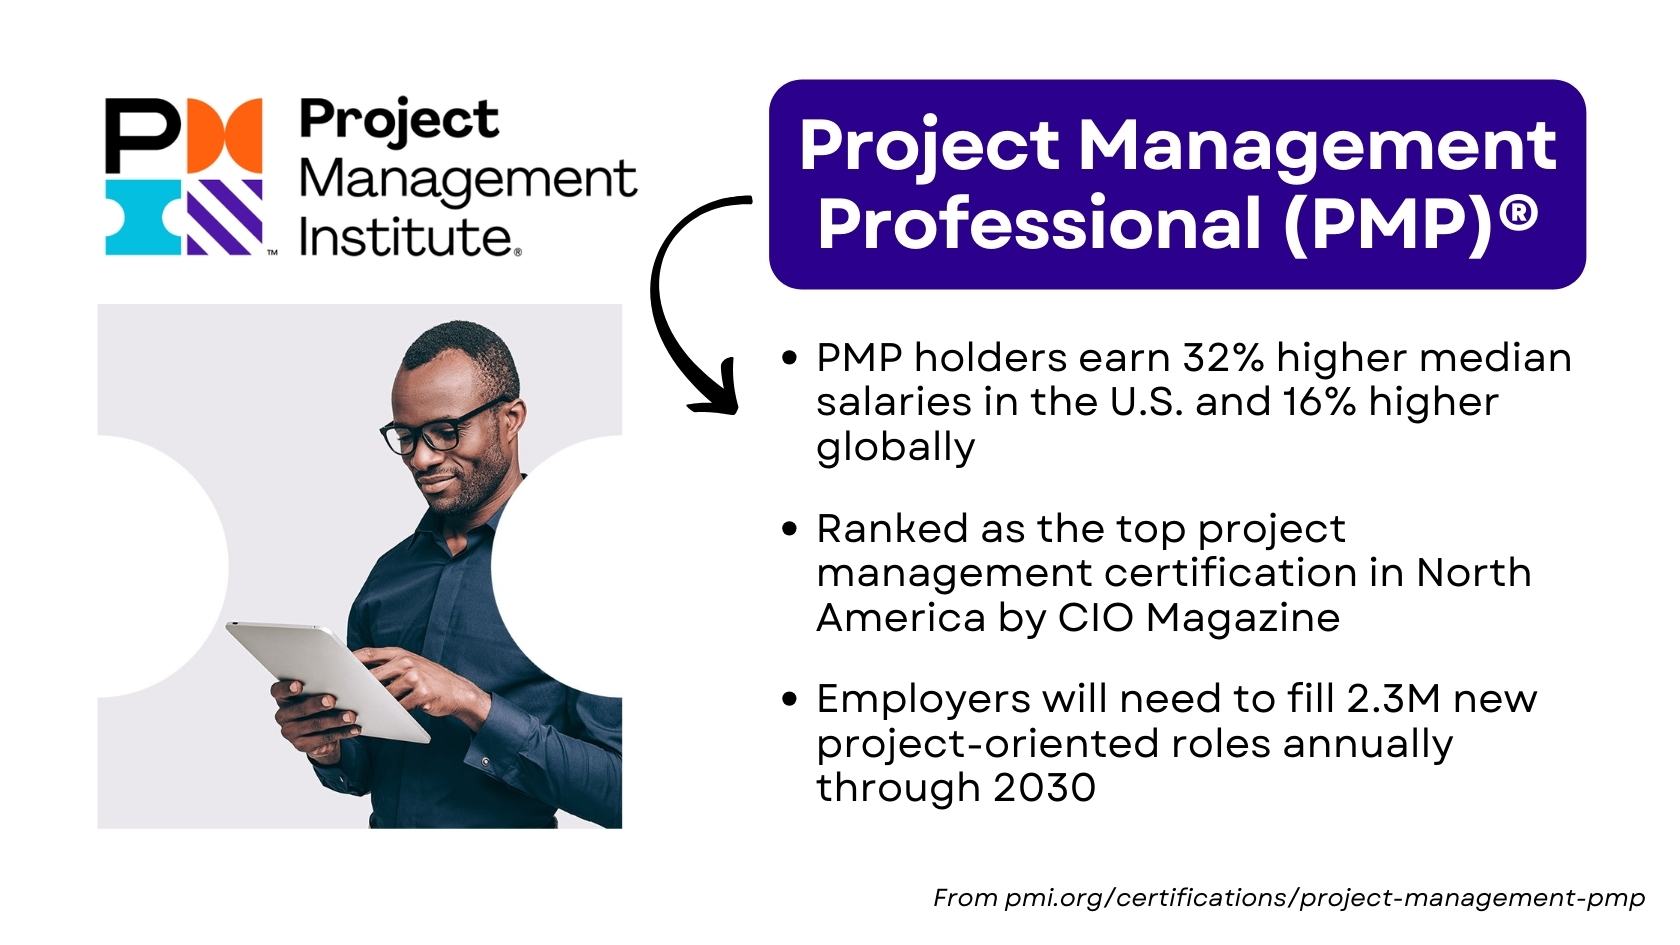 Project Management Institute Project Management Professional (PMP) certification benefits overview.